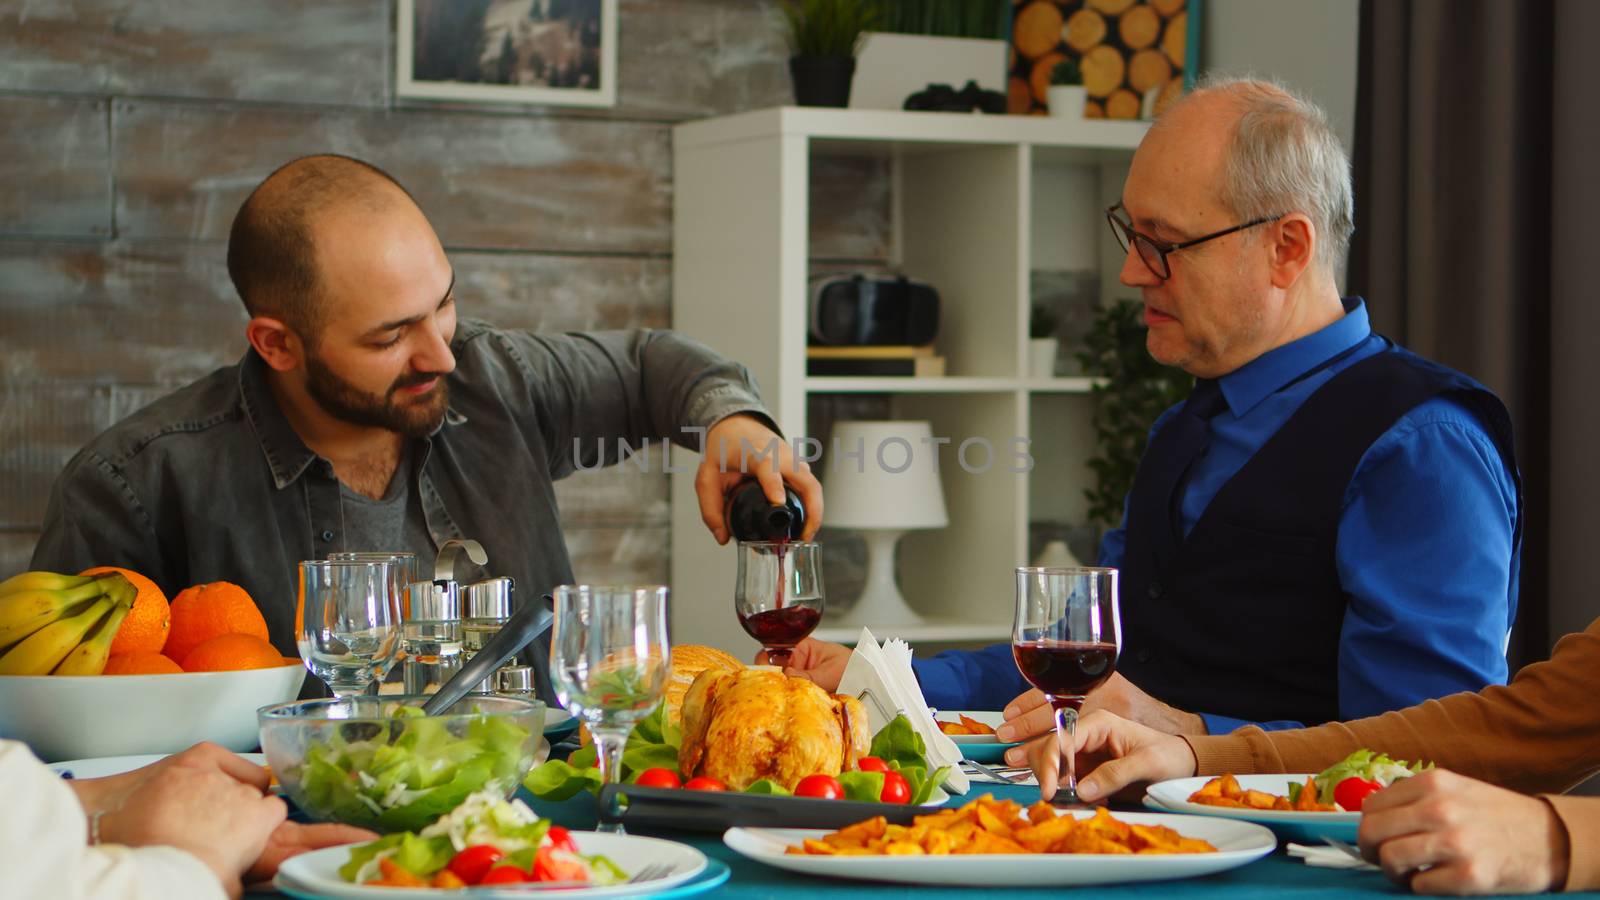 Young man serving his father in law with red wine by DCStudio